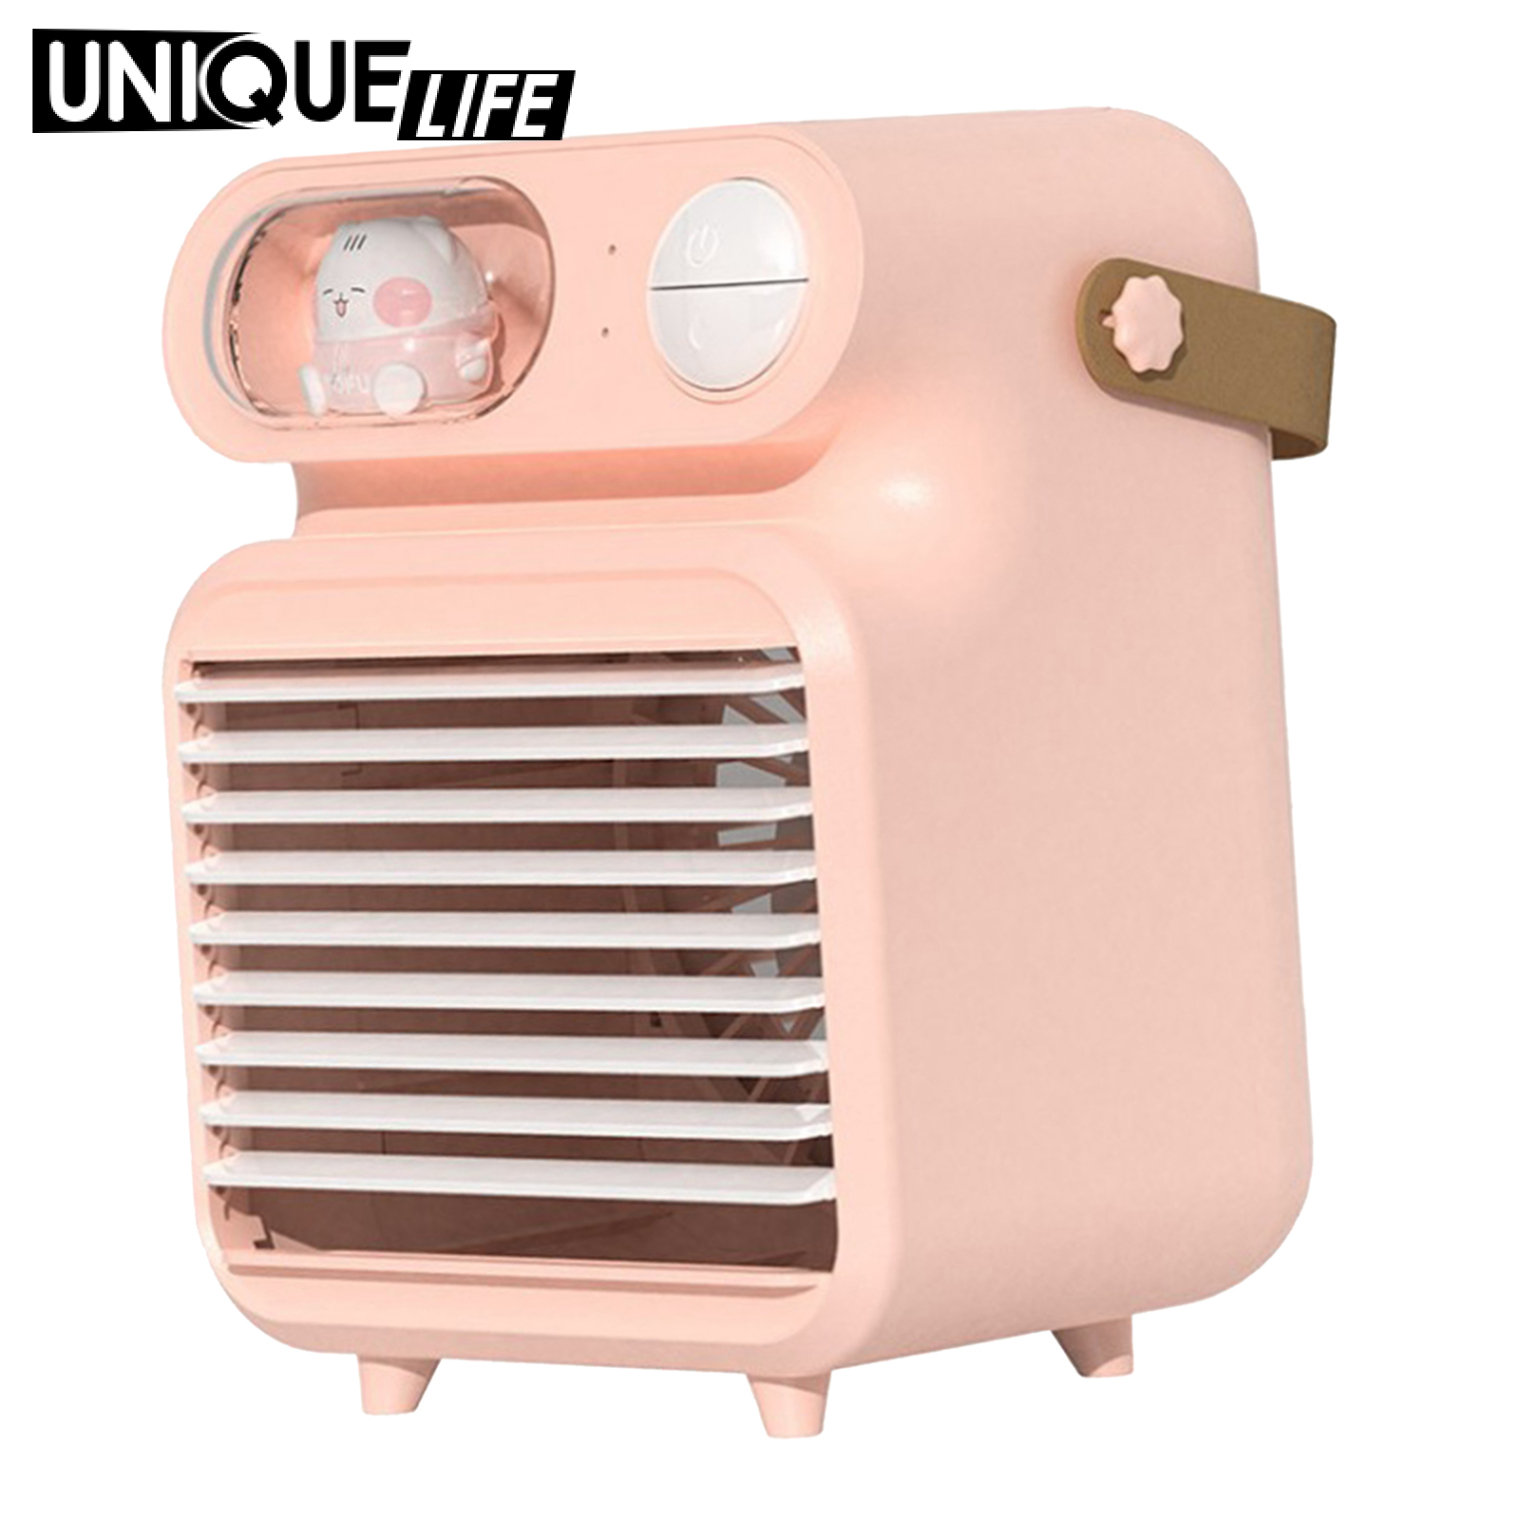 [Unique Life]Portable Air Conditioner Fan, Personal Space Mini Evaporative Air Cooler Quiet Desk Fan with Handle, Humidifier Misting Fan, 3 Speeds, with LED Light